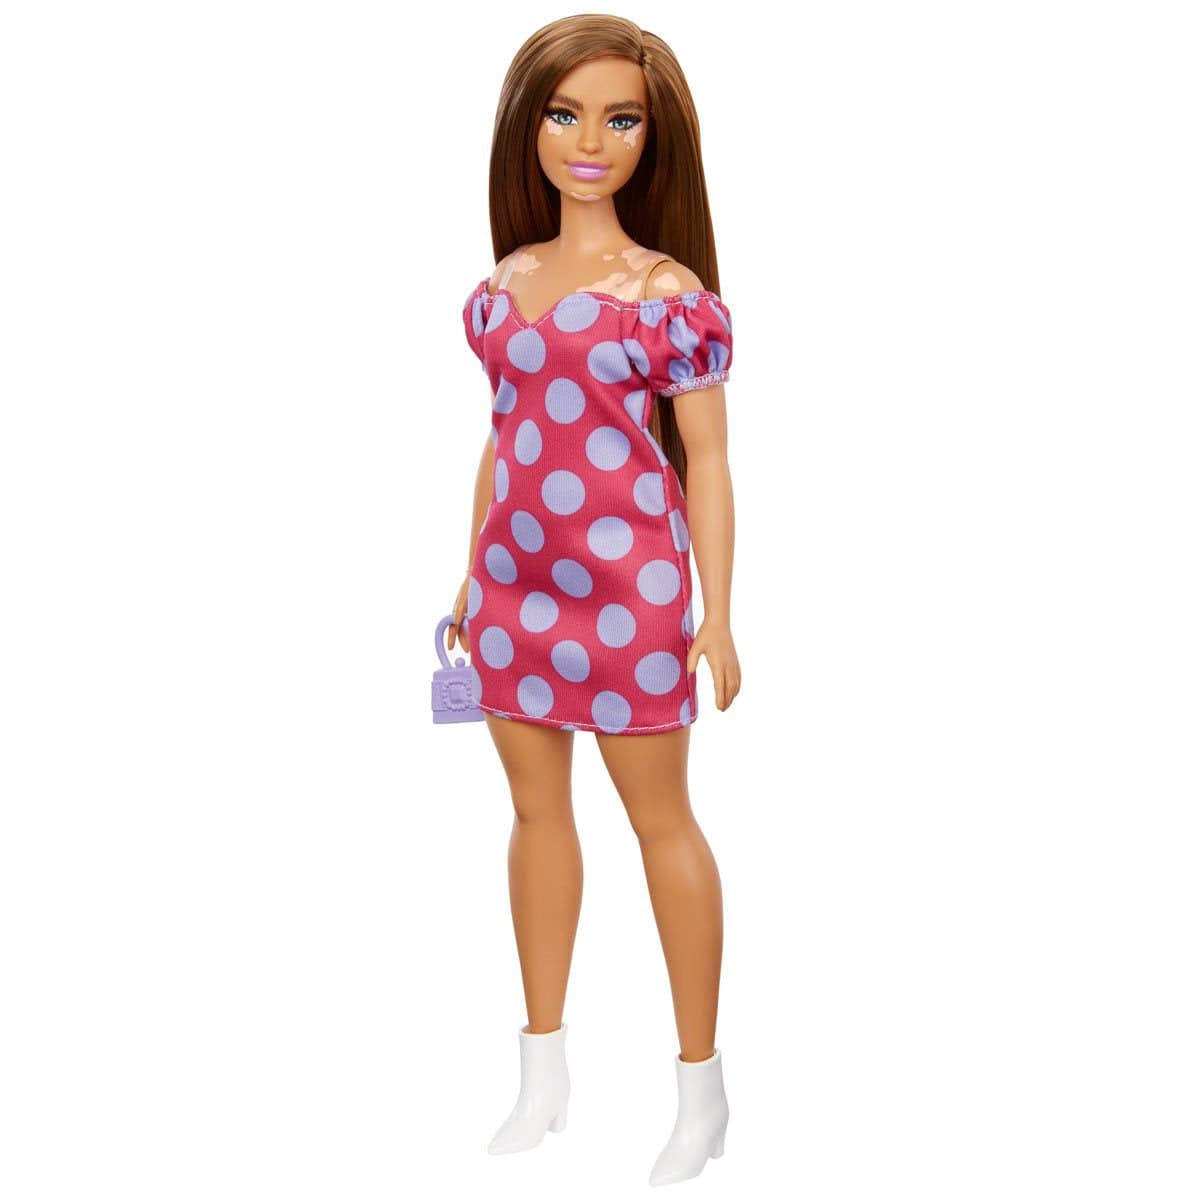 Barbie Fashionistas Doll #171 with Brunette Hair